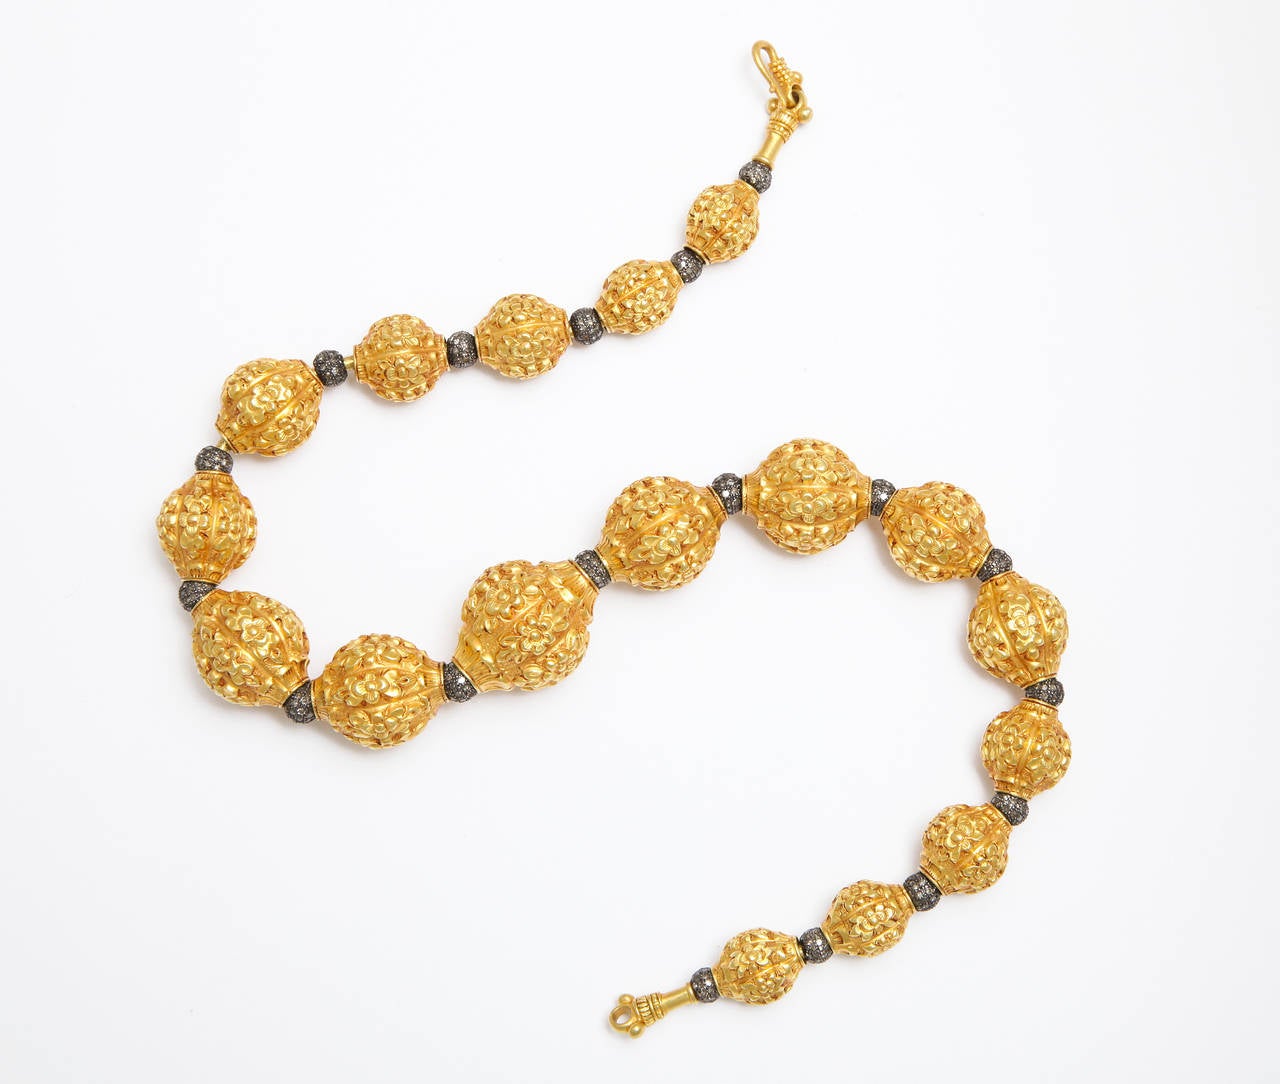 A necklace composed of 17 graduated 22kt yellow gold repousse floral beads and 18 rhodium plated sterling silver and diamond beads. The beads run through an 18kt yellow gold rope necklace. There are approximately 8.54cts of diamonds.